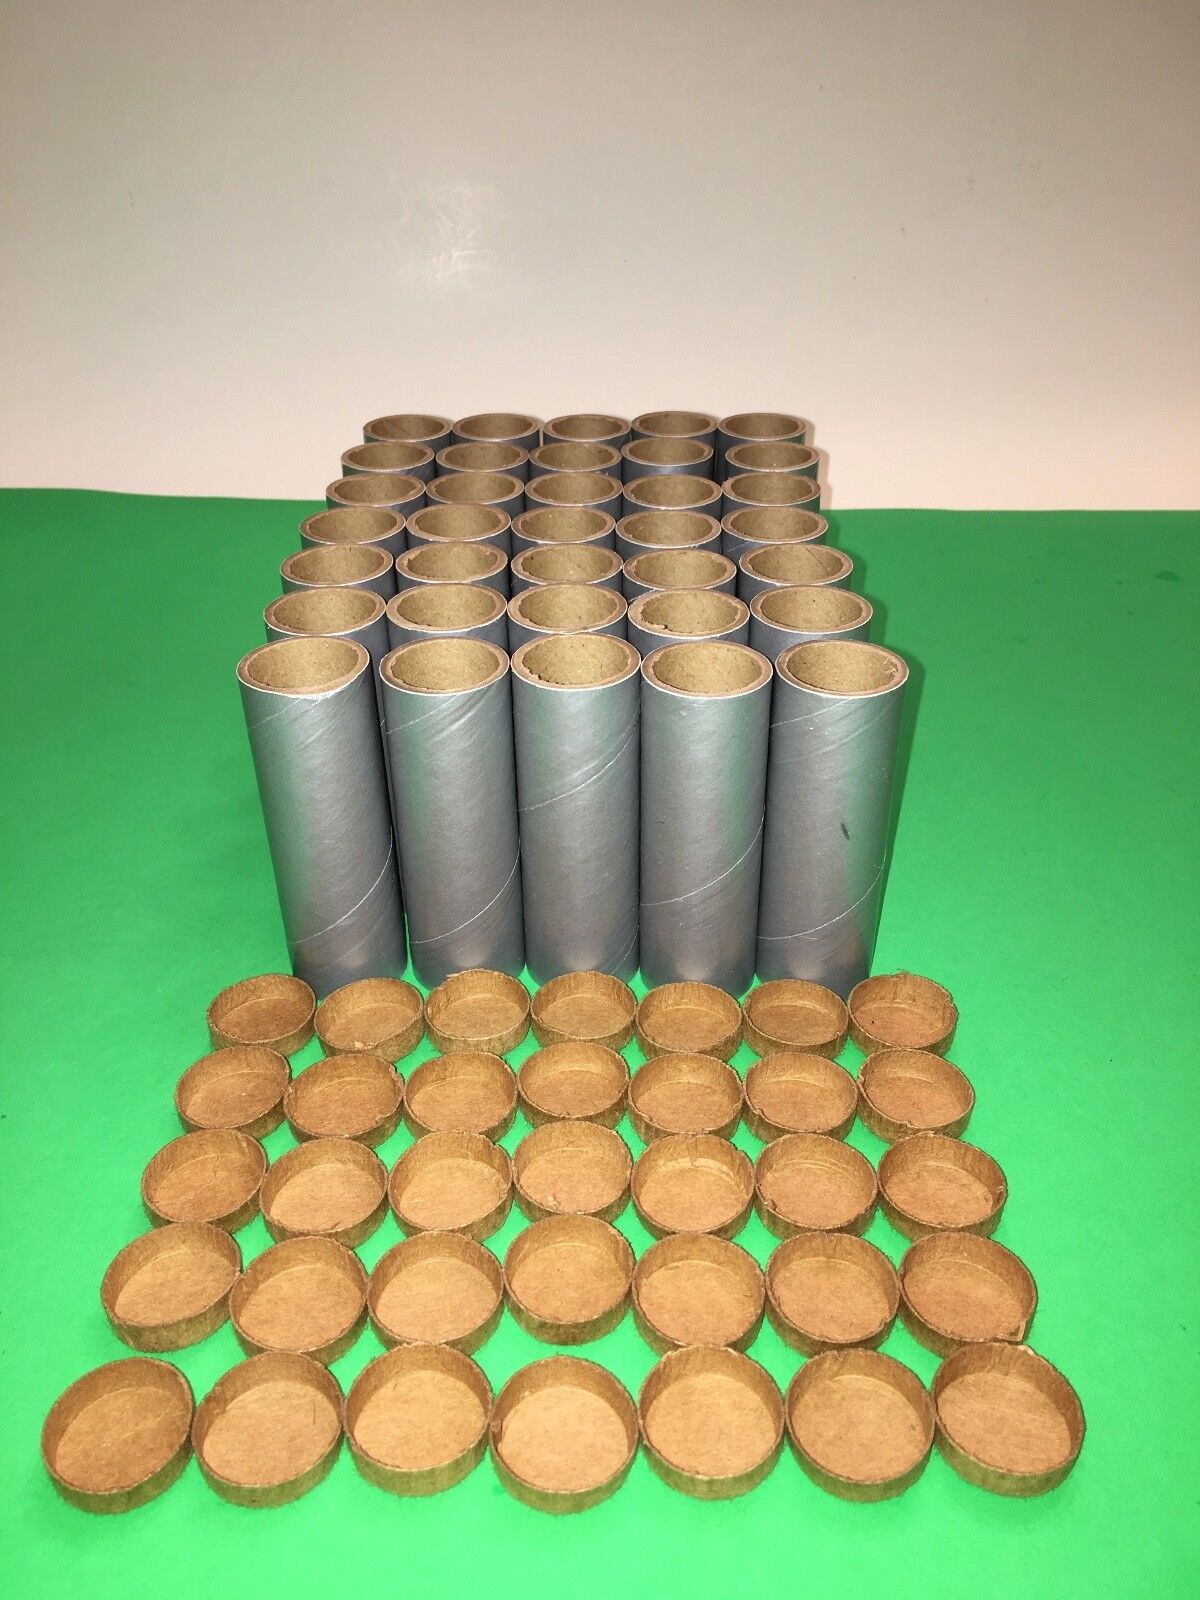 35 NEW Spiral 3 1/2"x1"x1/8" Fireworks Silver PYRO Cardboard Tubes W/End Plugs ! Unbranded Does Not Apply